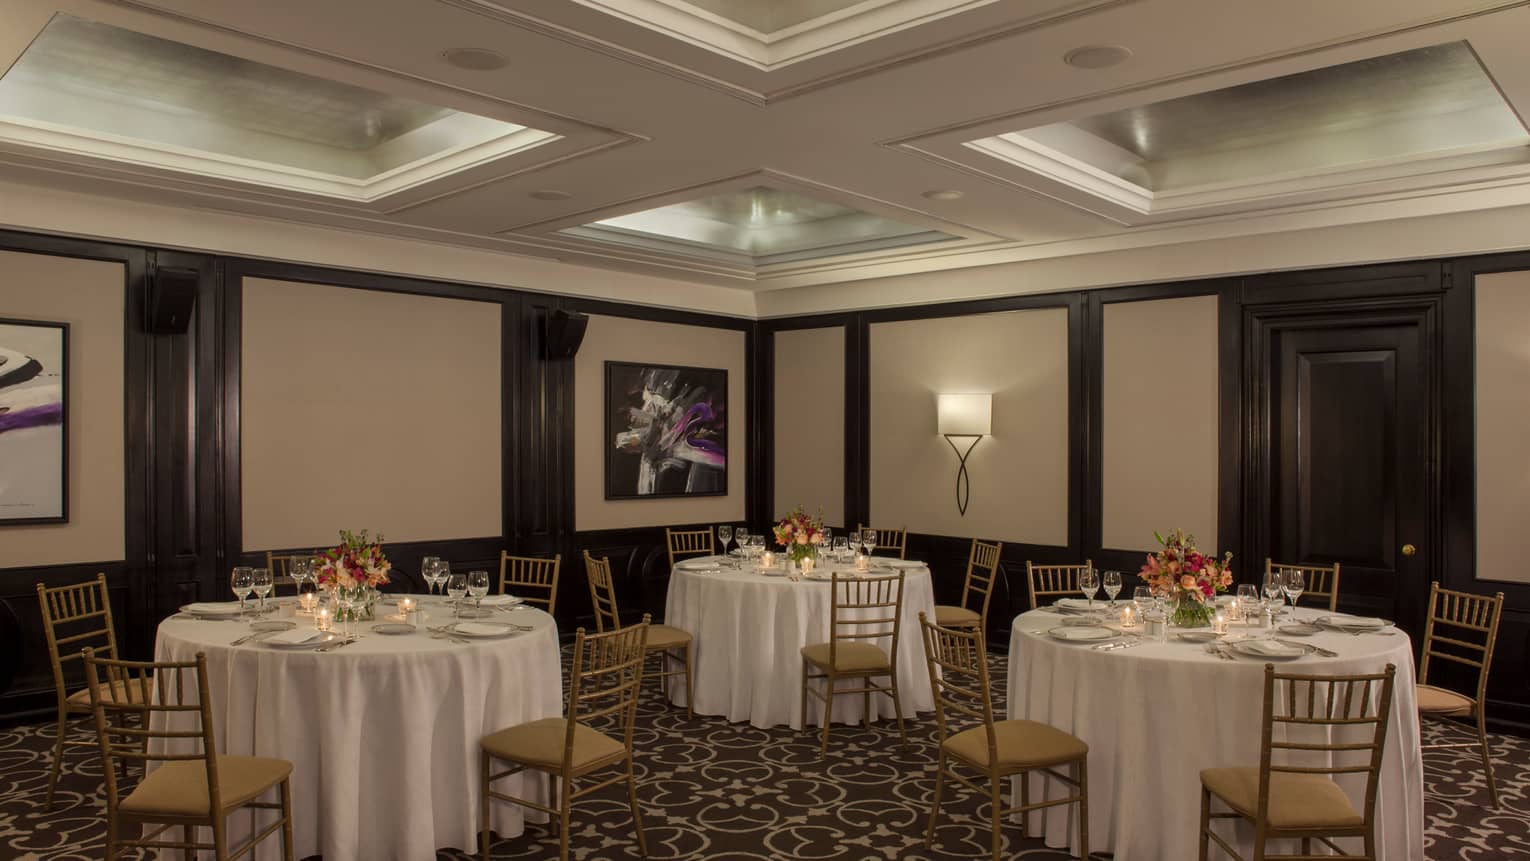 Small round banquet tables and chairs under recessed ceiling